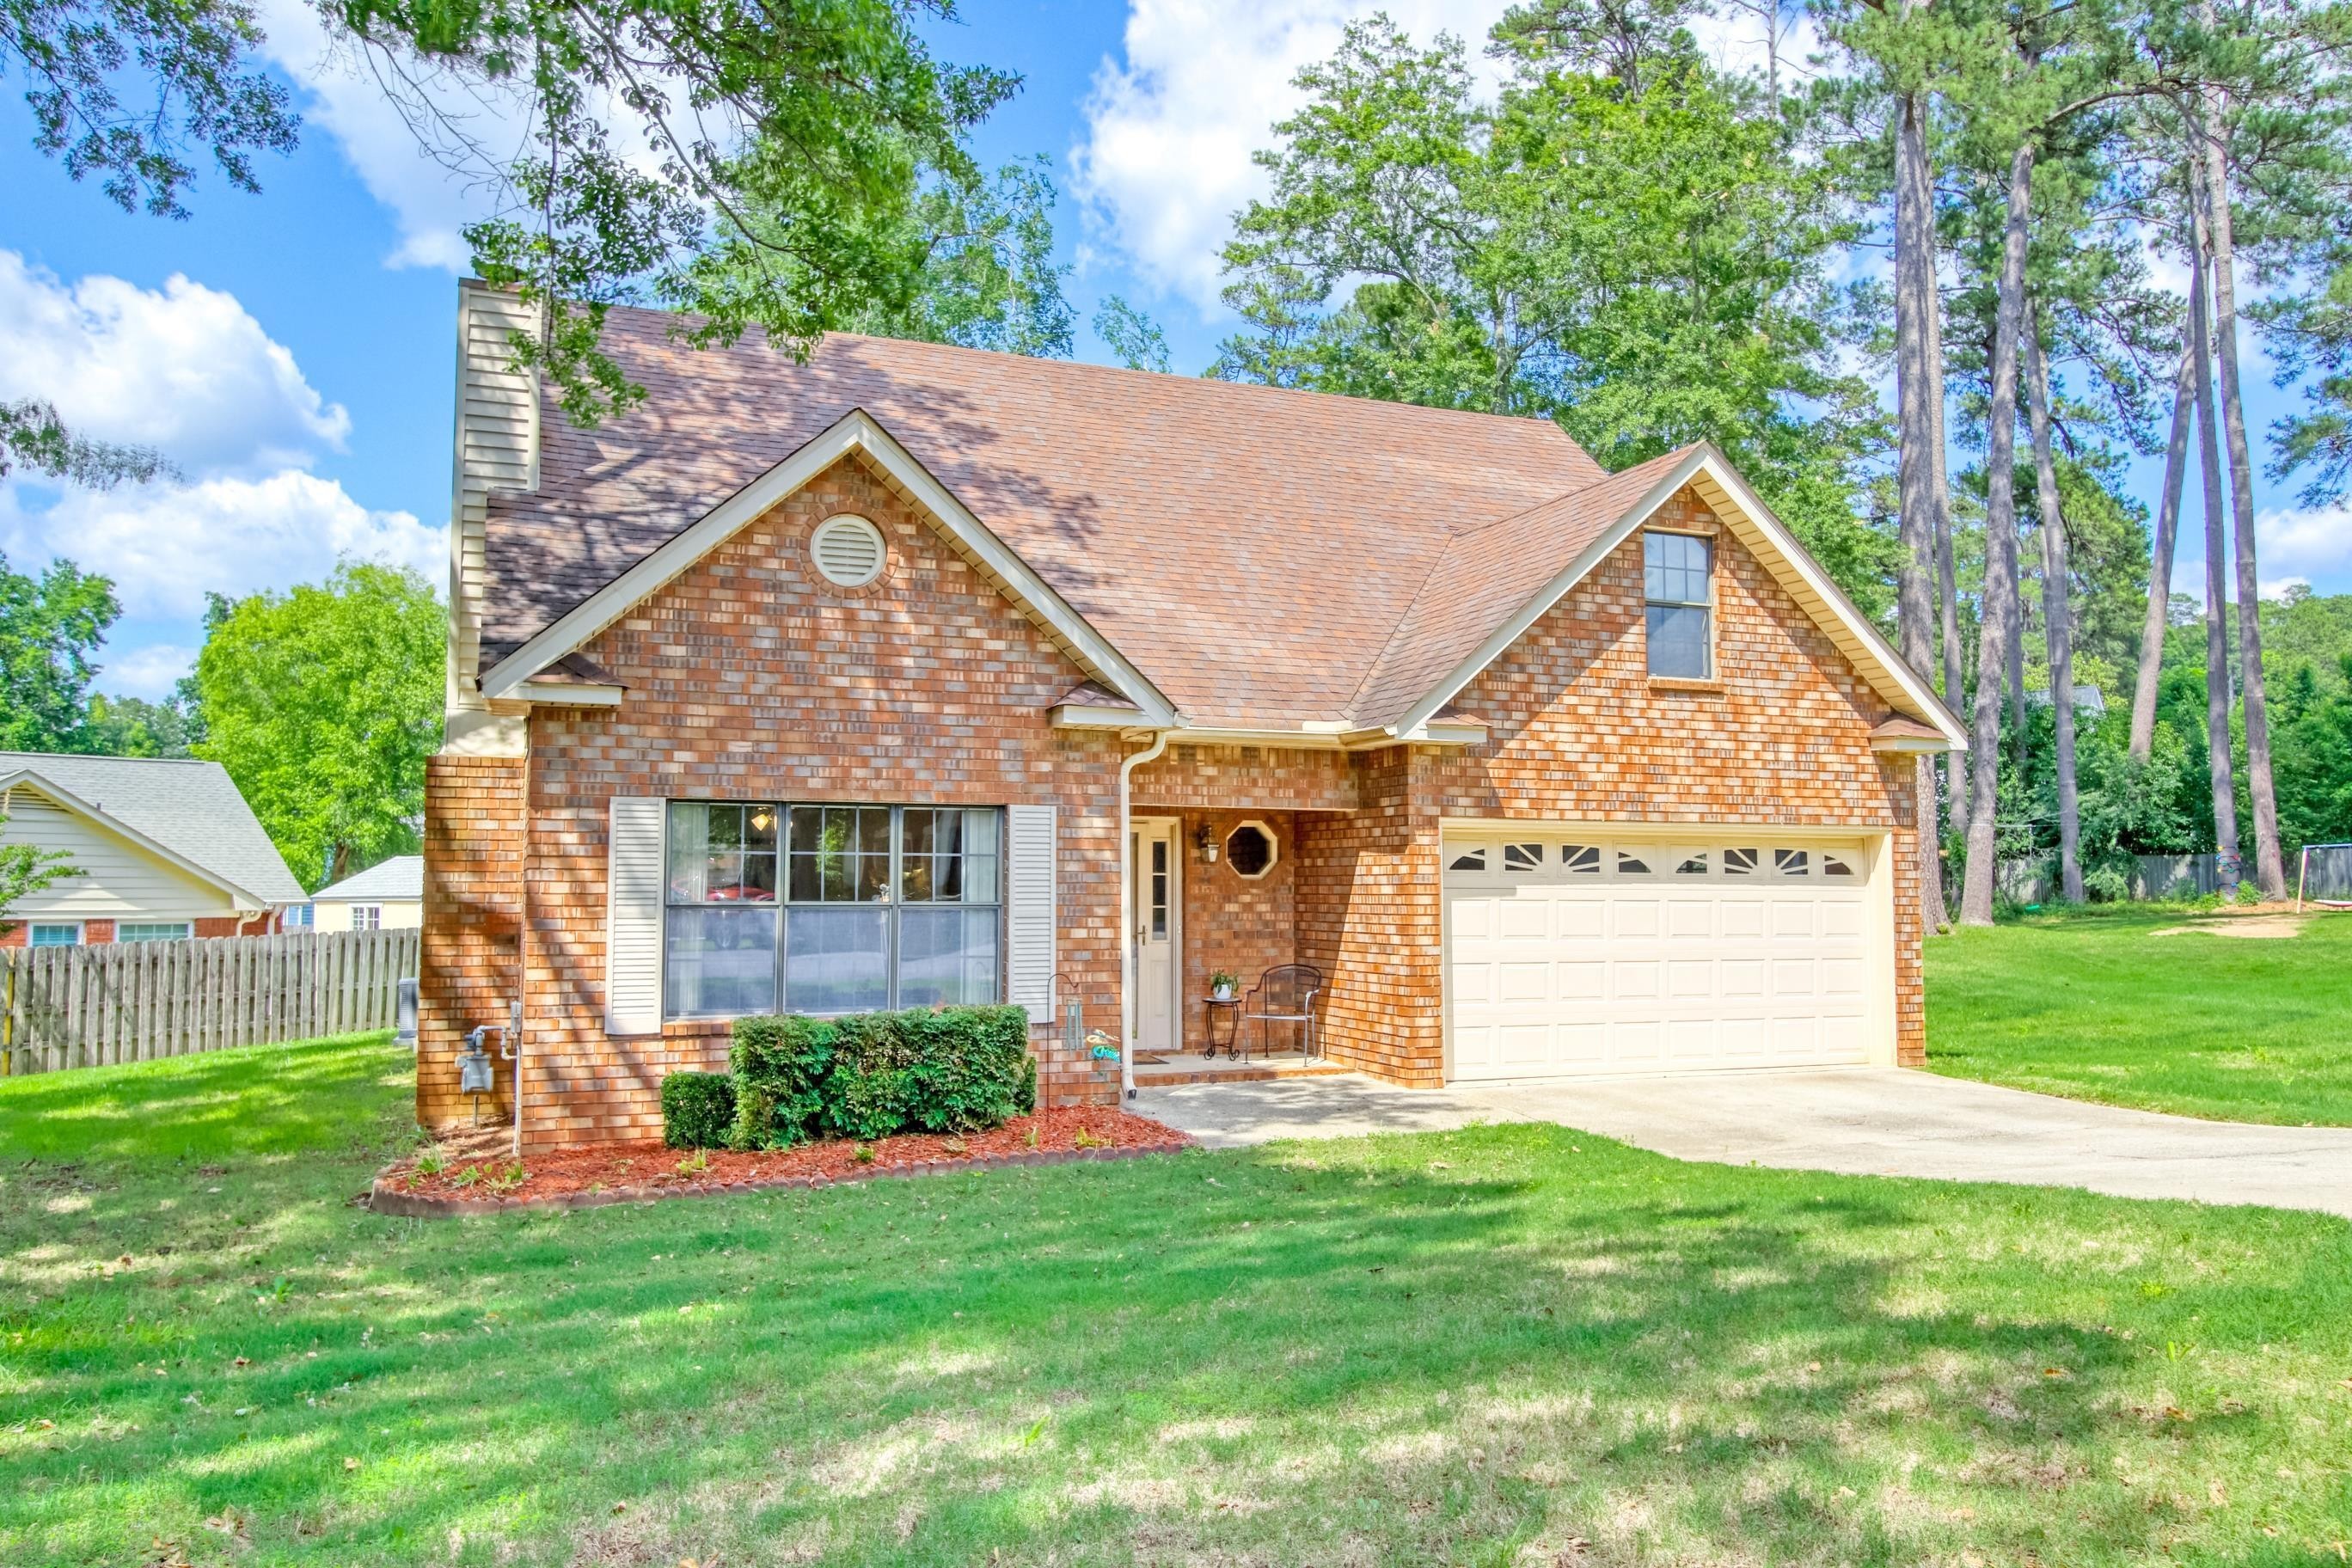 2. 4618 Country Meadows Court